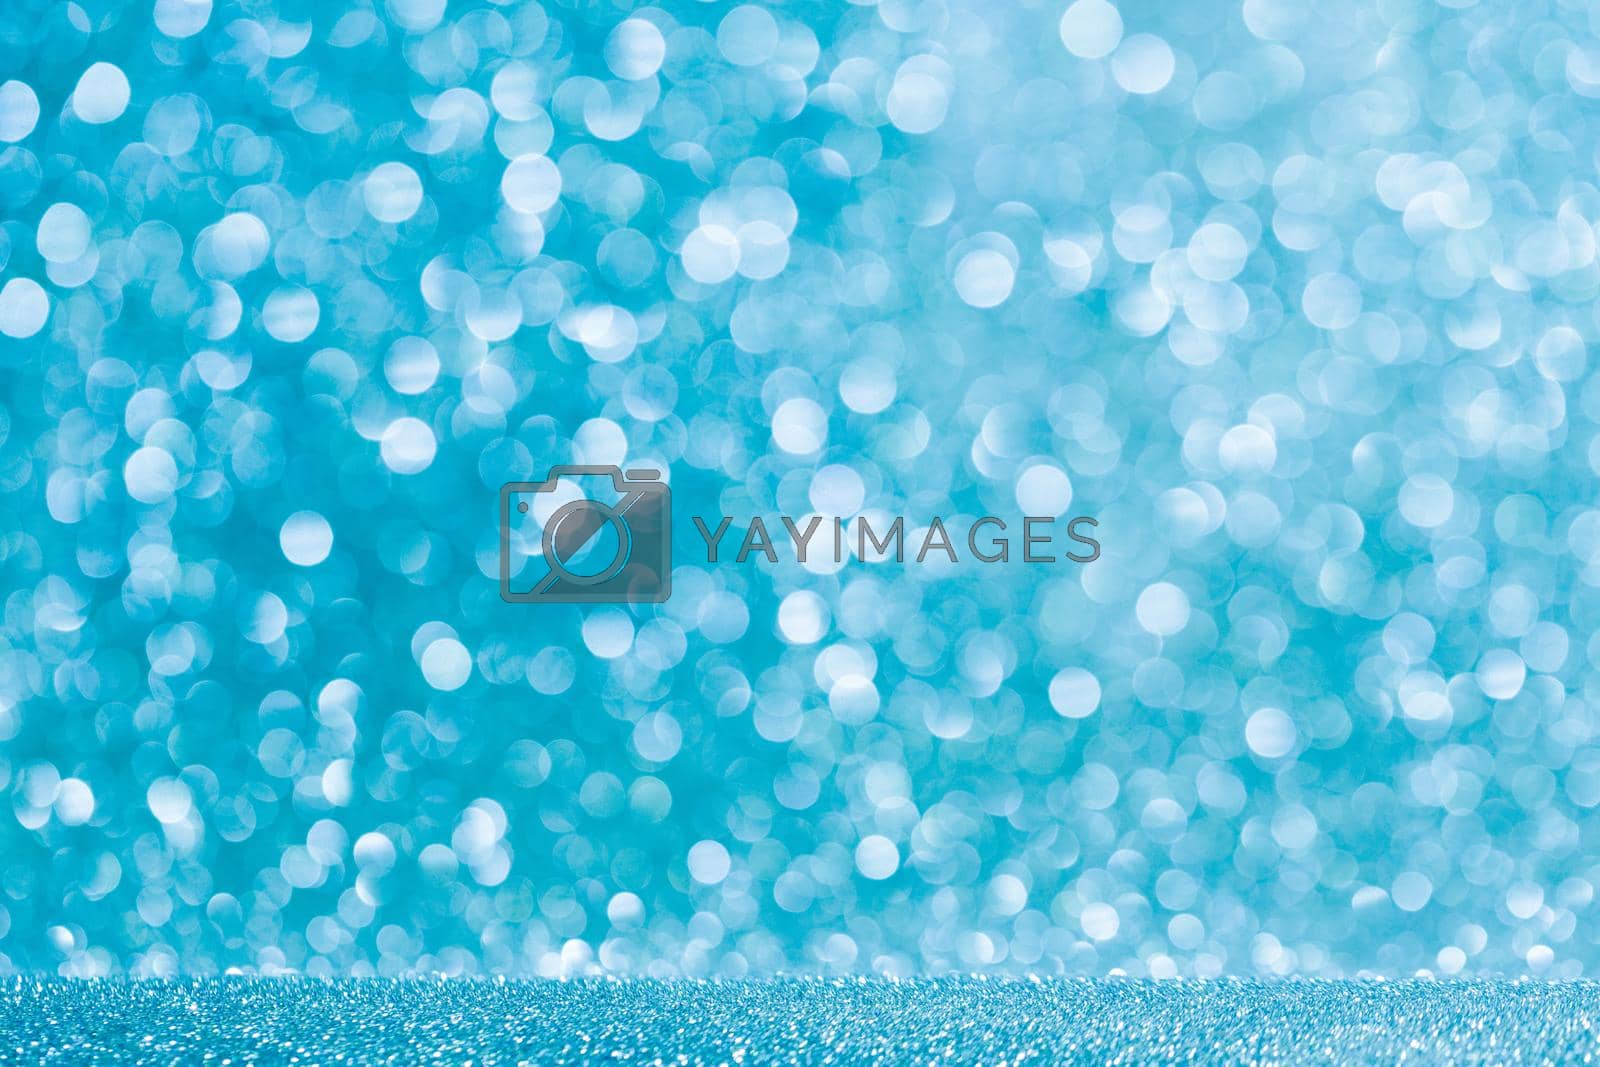 Royalty free image of Lights on blue background by Yellowj